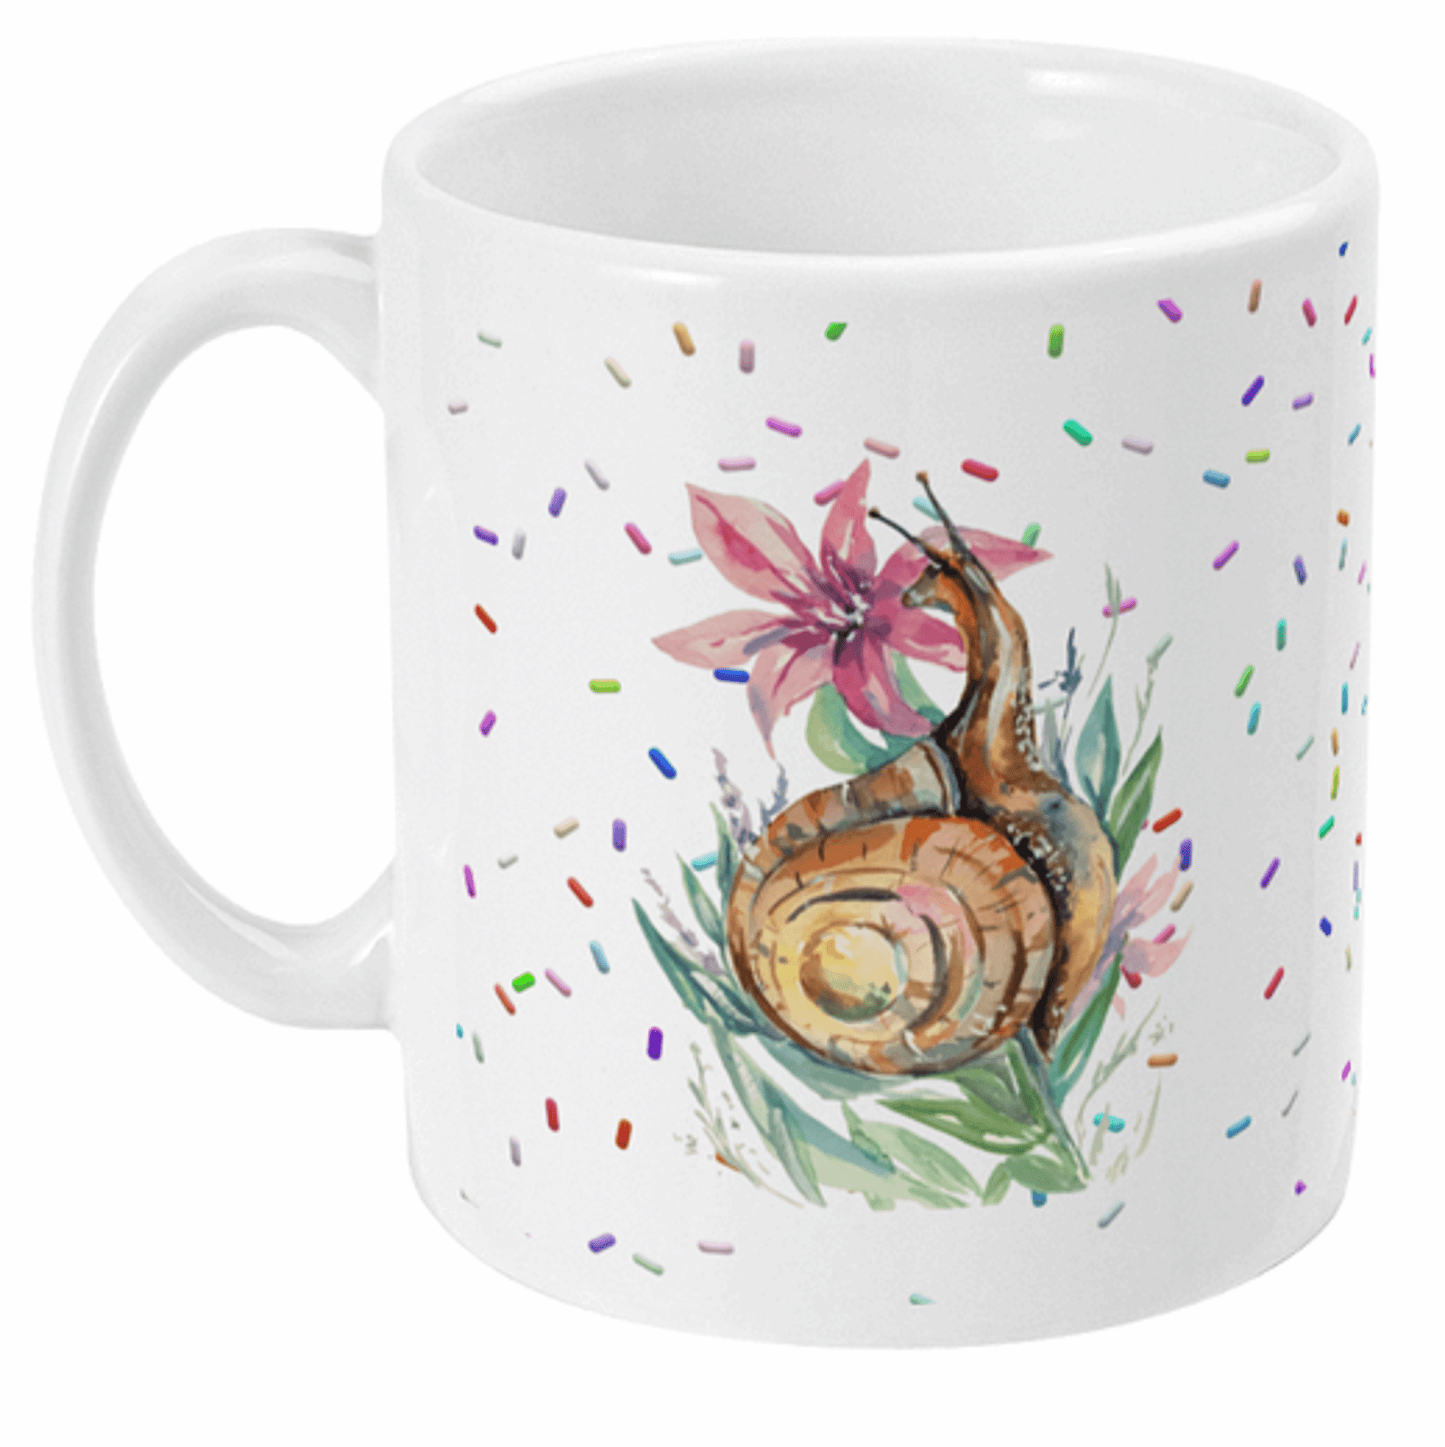  Watercolour Snail and Flower Coffee Mug by Free Spirit Accessories sold by Free Spirit Accessories